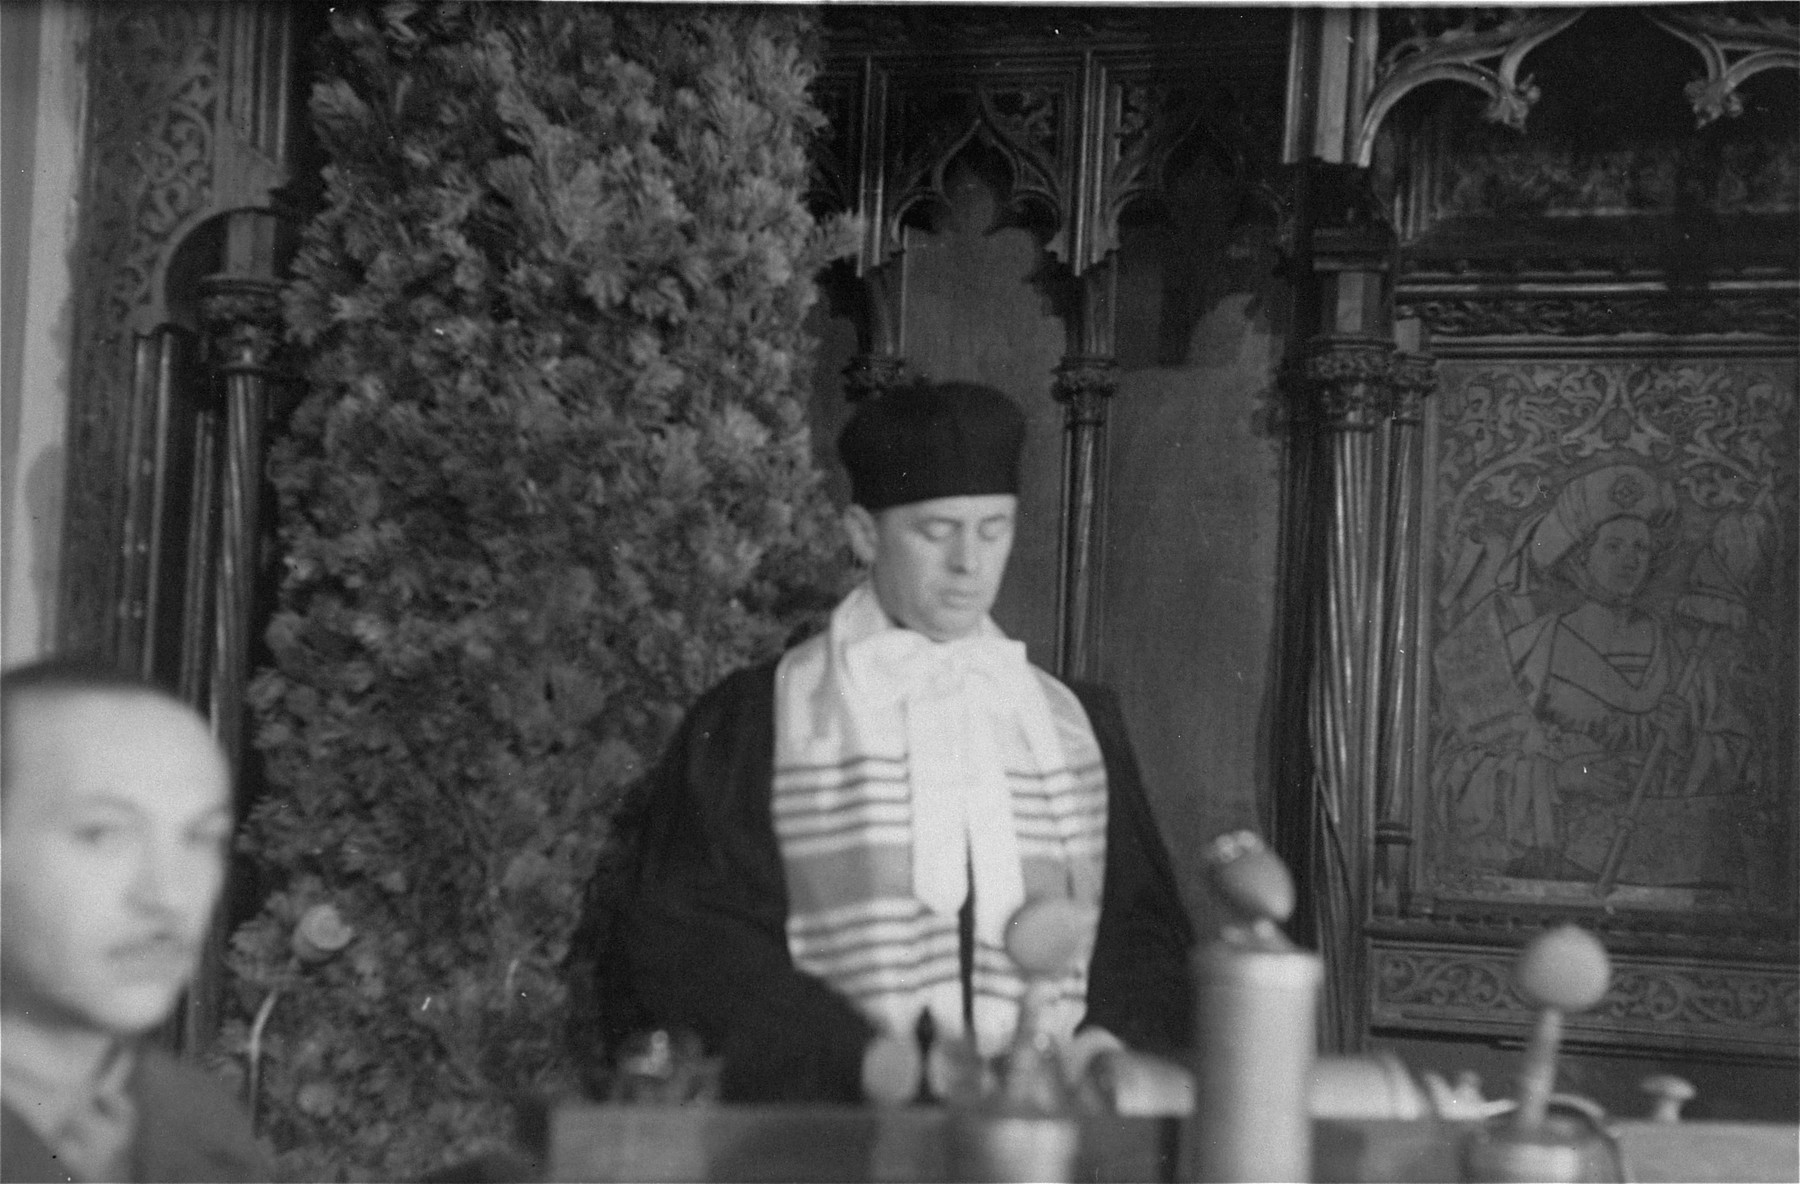 Cantor Schenker says a prayer for the victims of the Holocaust at the first meeting of the Central Committee of Liberated Jews in the U.S. Zone of Germany.